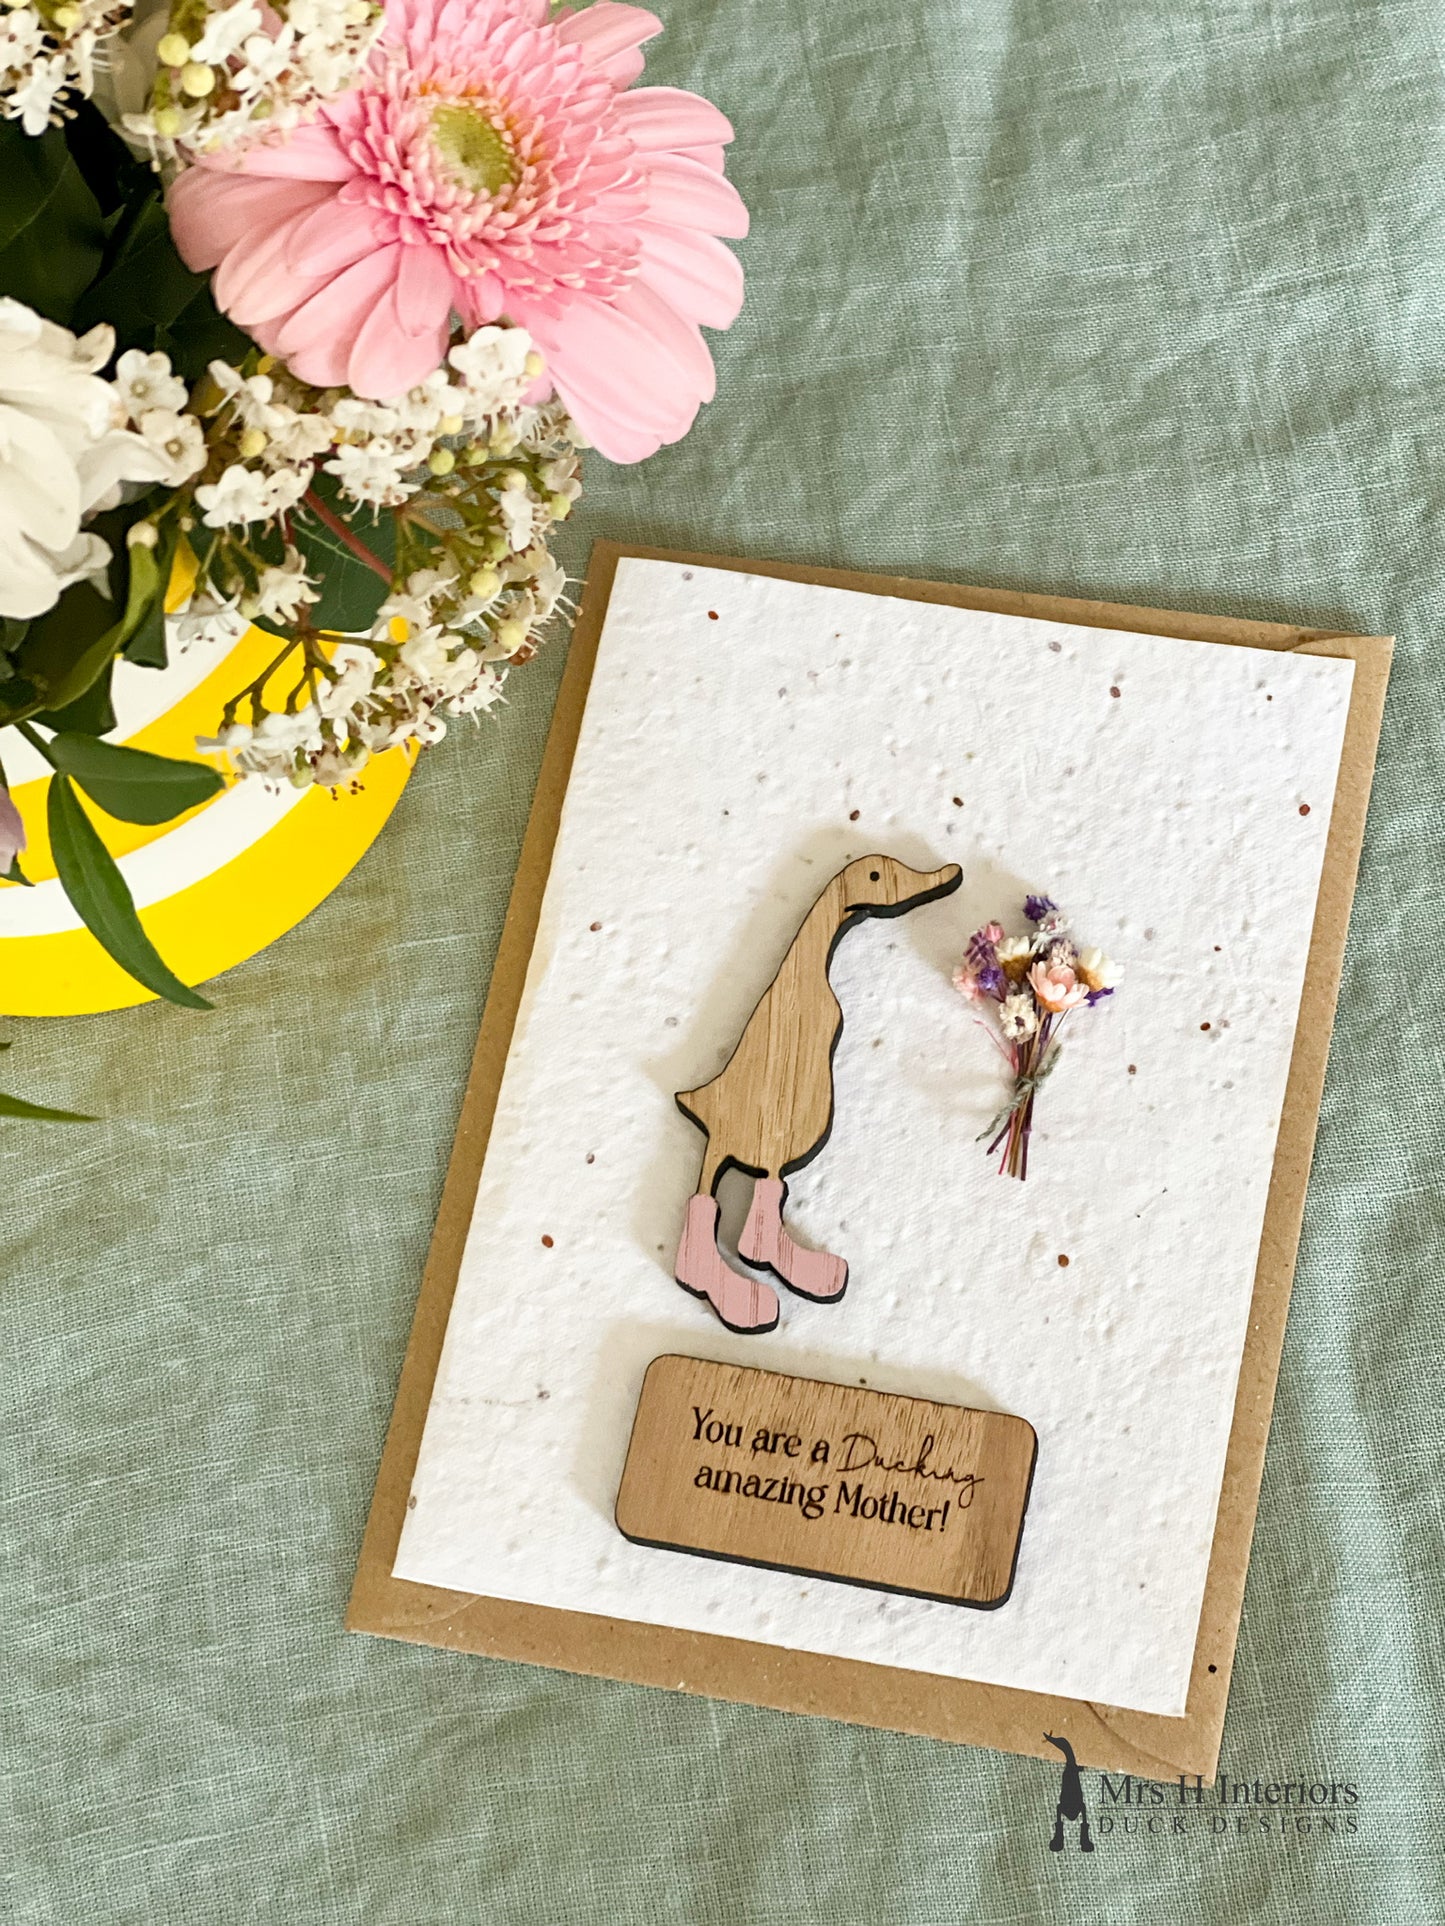 You Are A Ducking Amazing Mother - Mother's Day Card - Duck with Flowers - Decorated Wooden Duck in Boots by Mrs H the Duck Lady